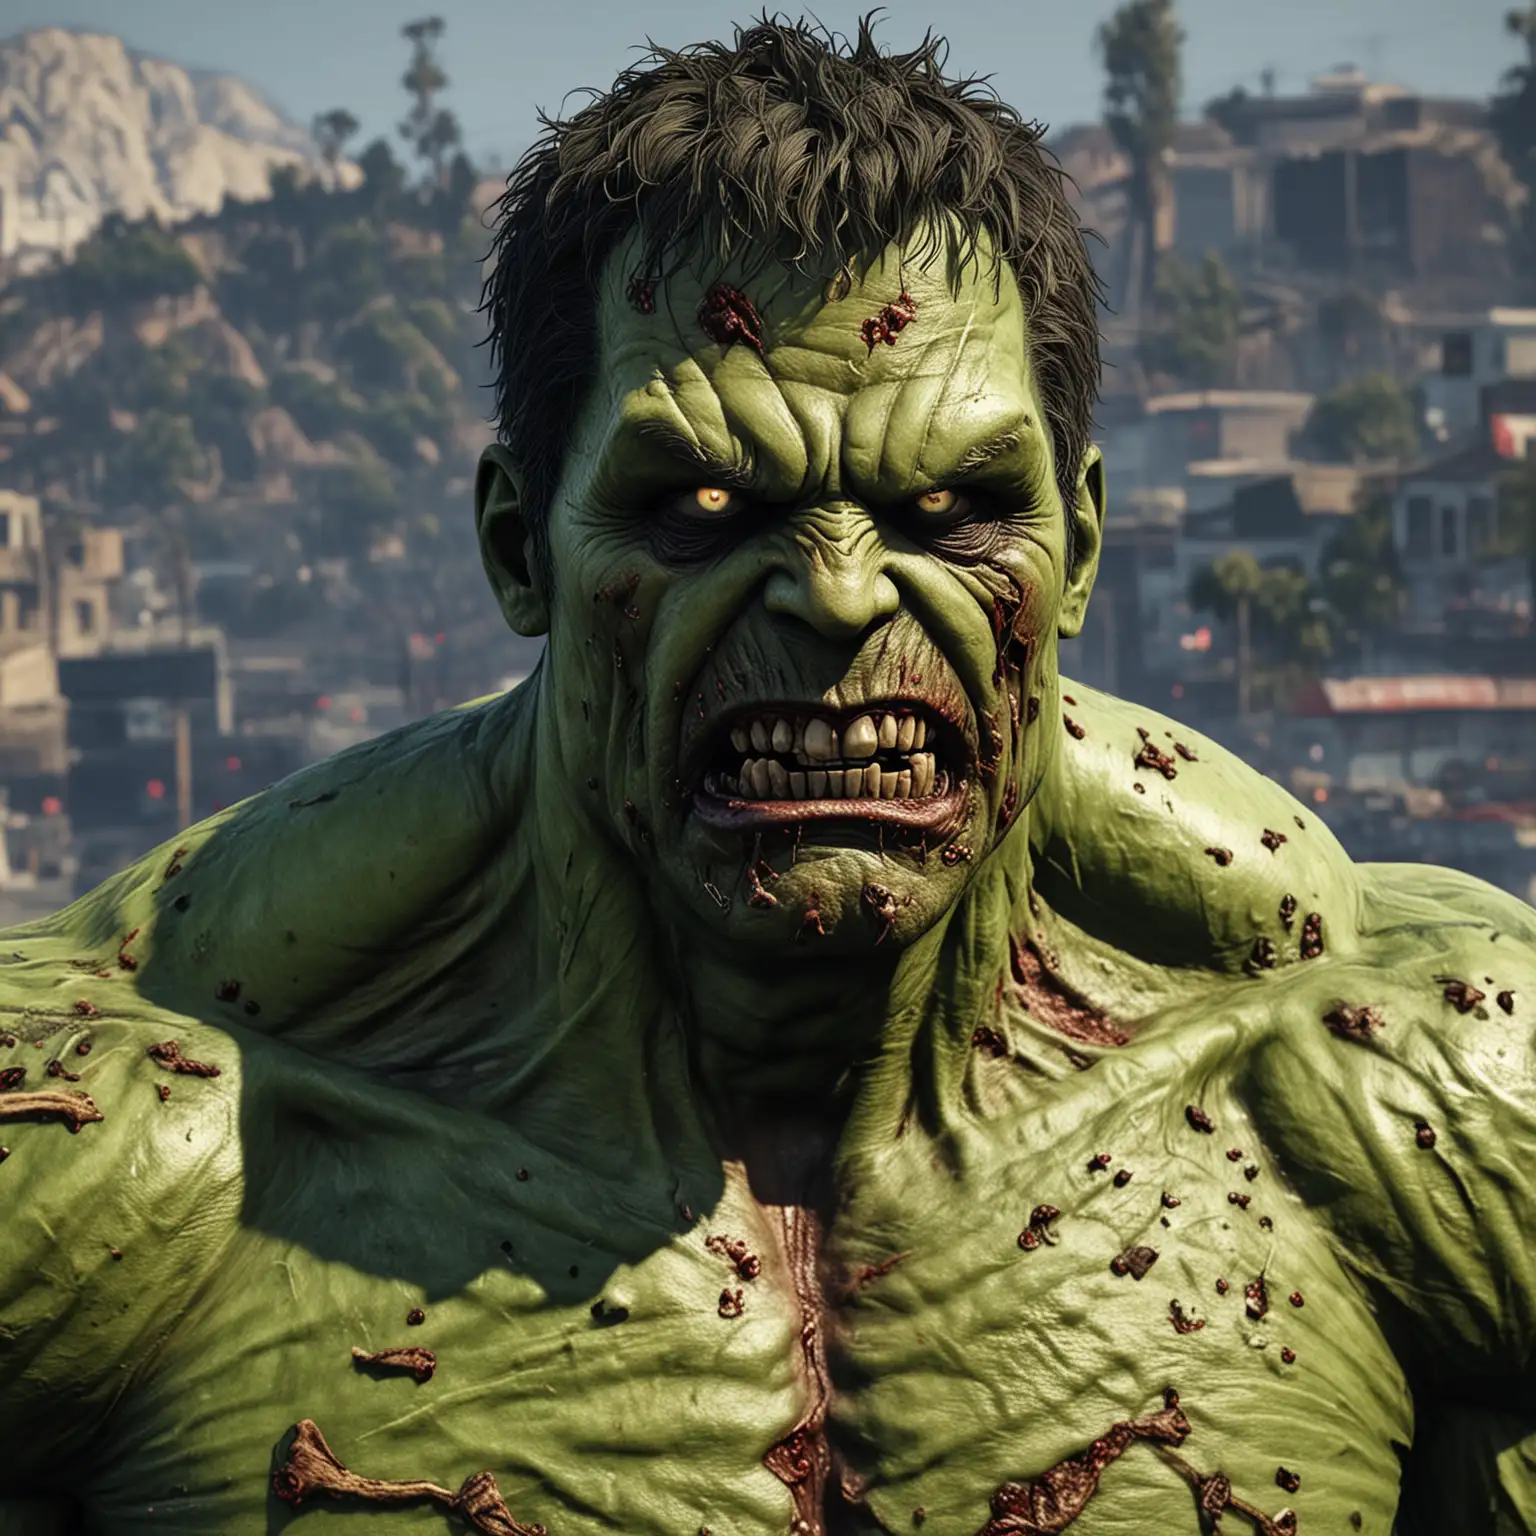 Realistic Hulk Zombie Terrifying Undead with Rotten Features